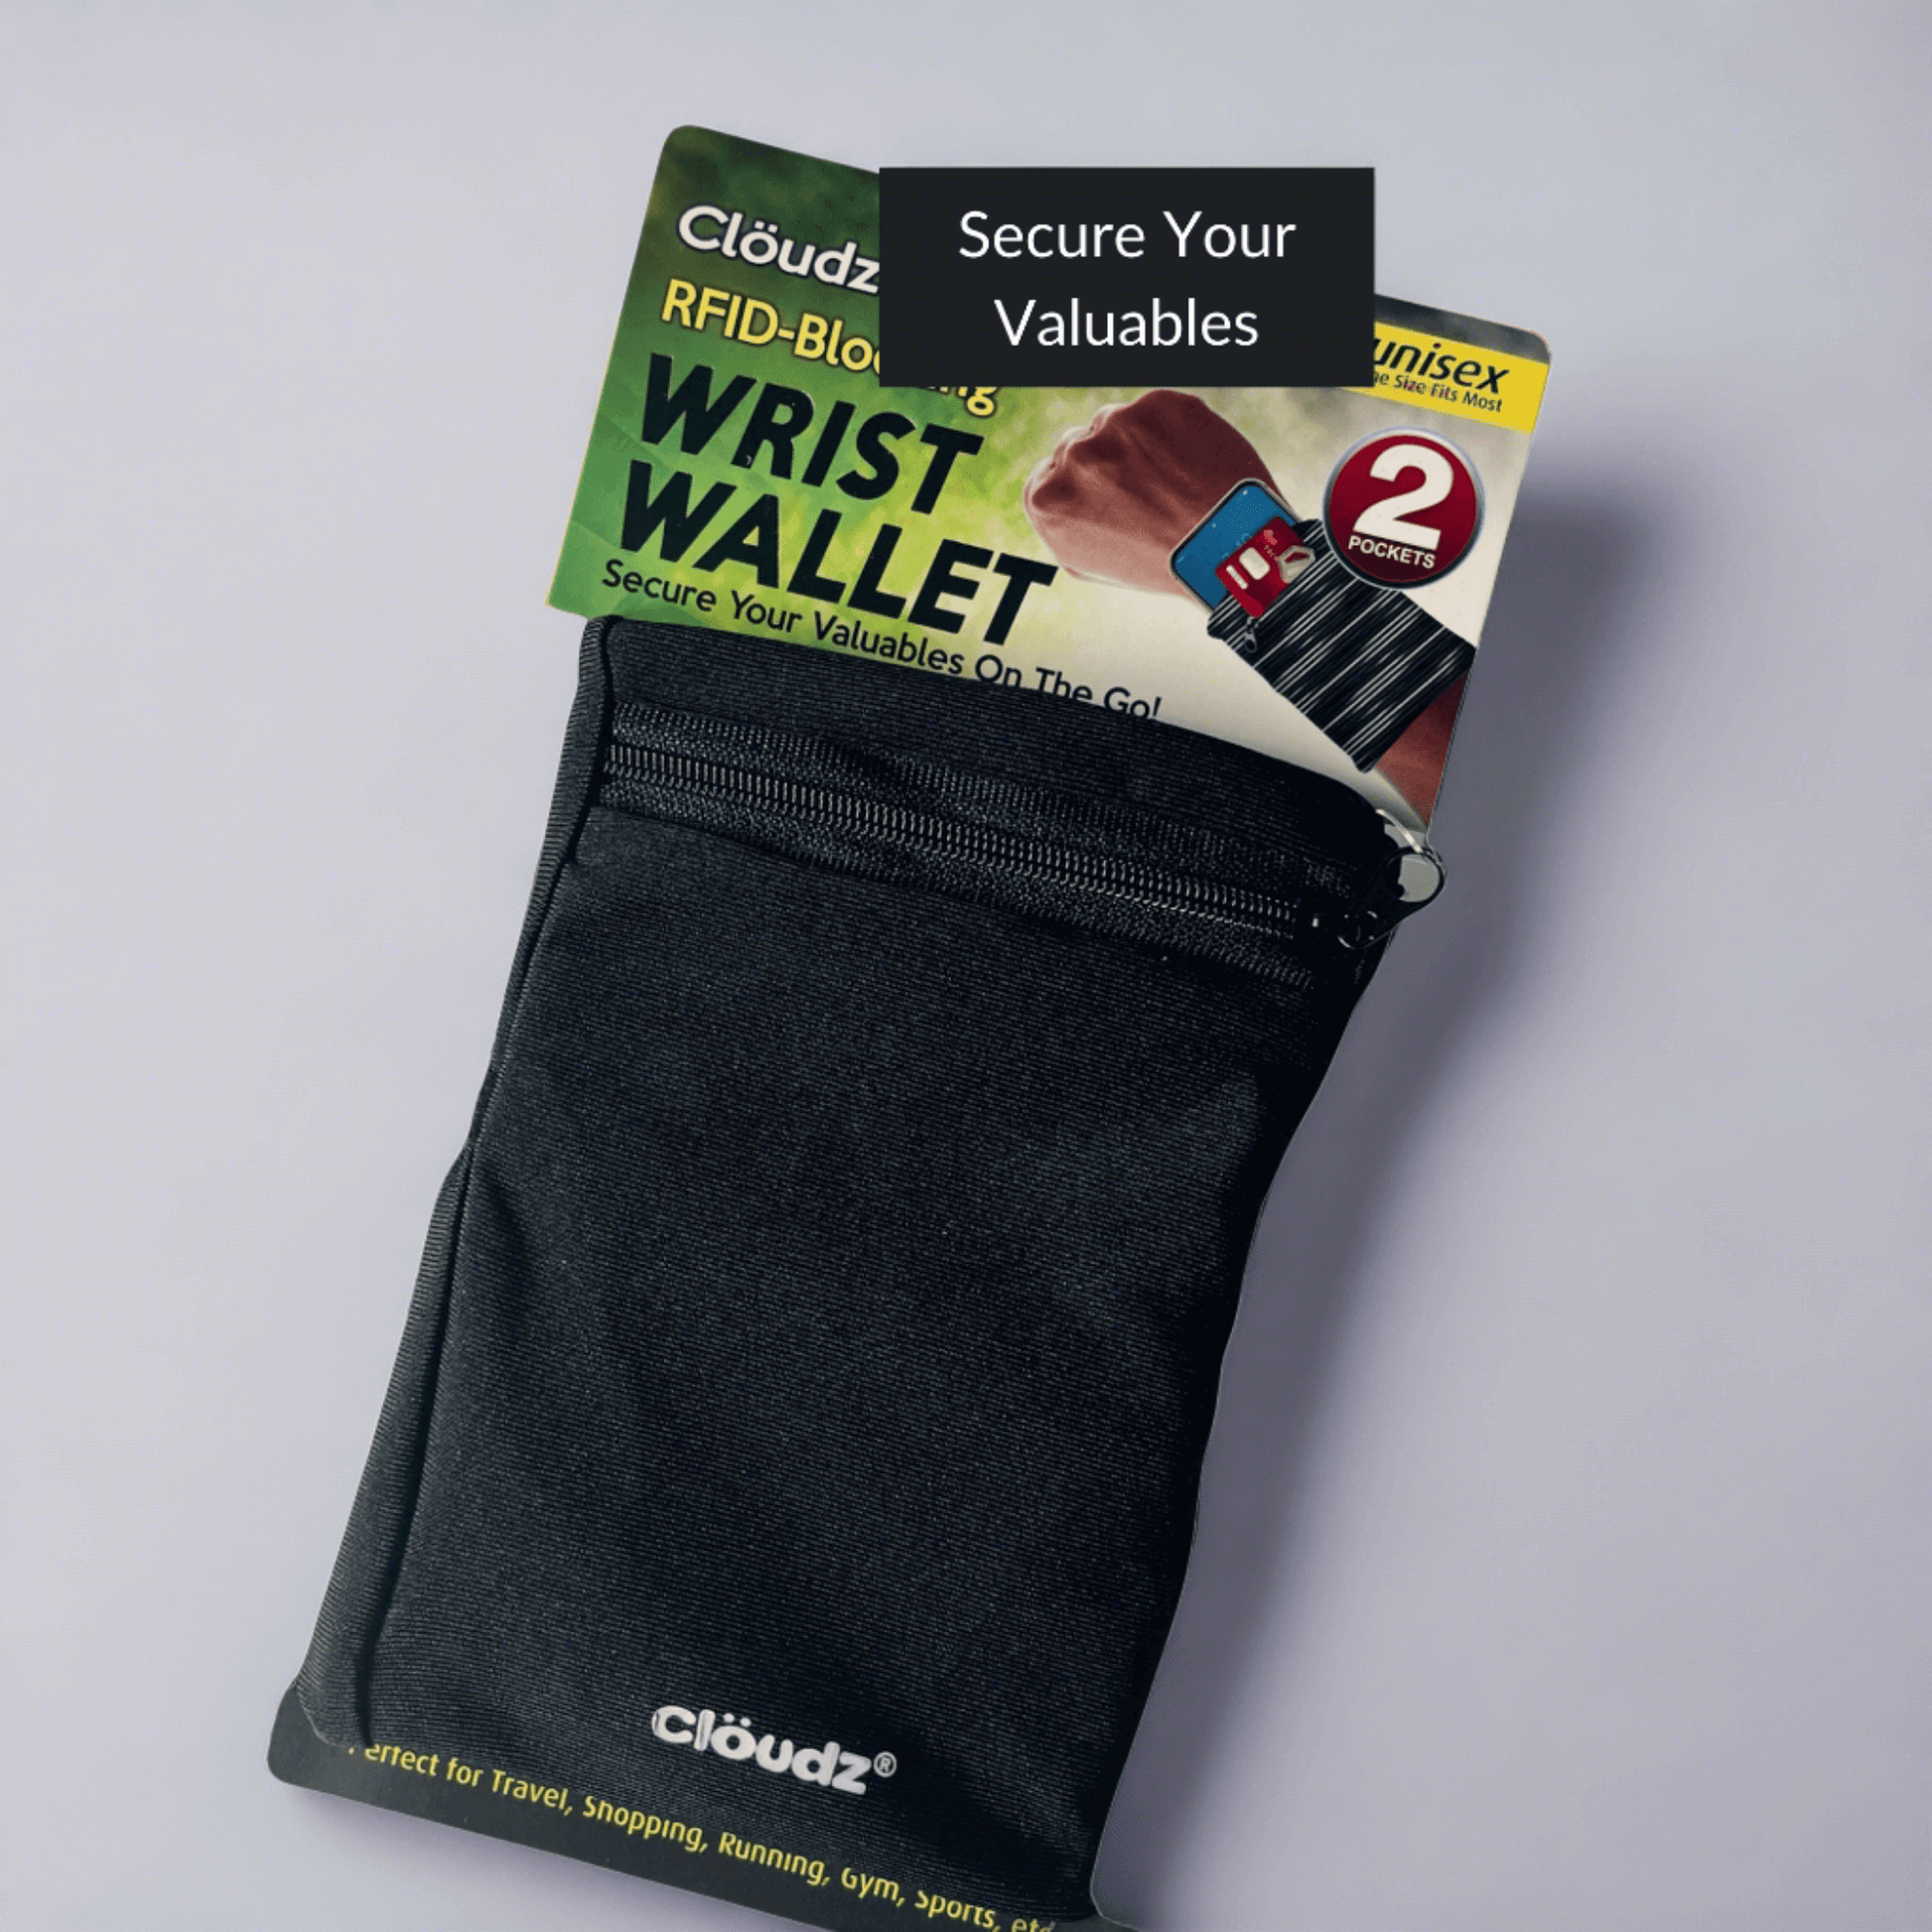 Black RFID-blocking wrist wallet with secured compartment for valuables.